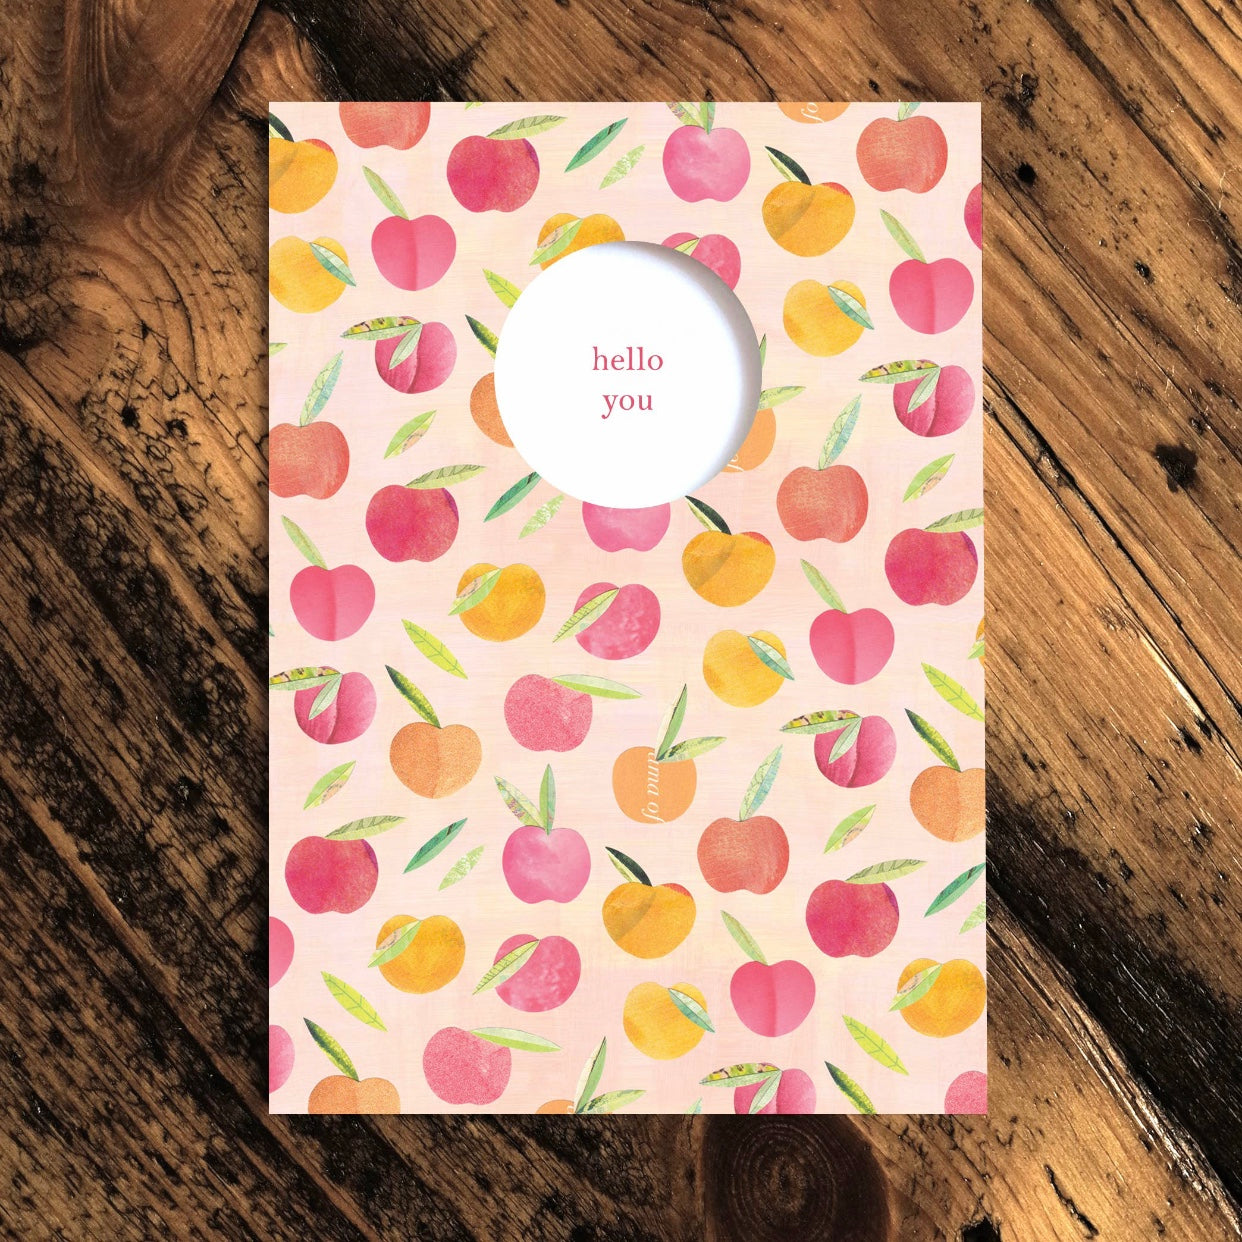 hello you greeting card